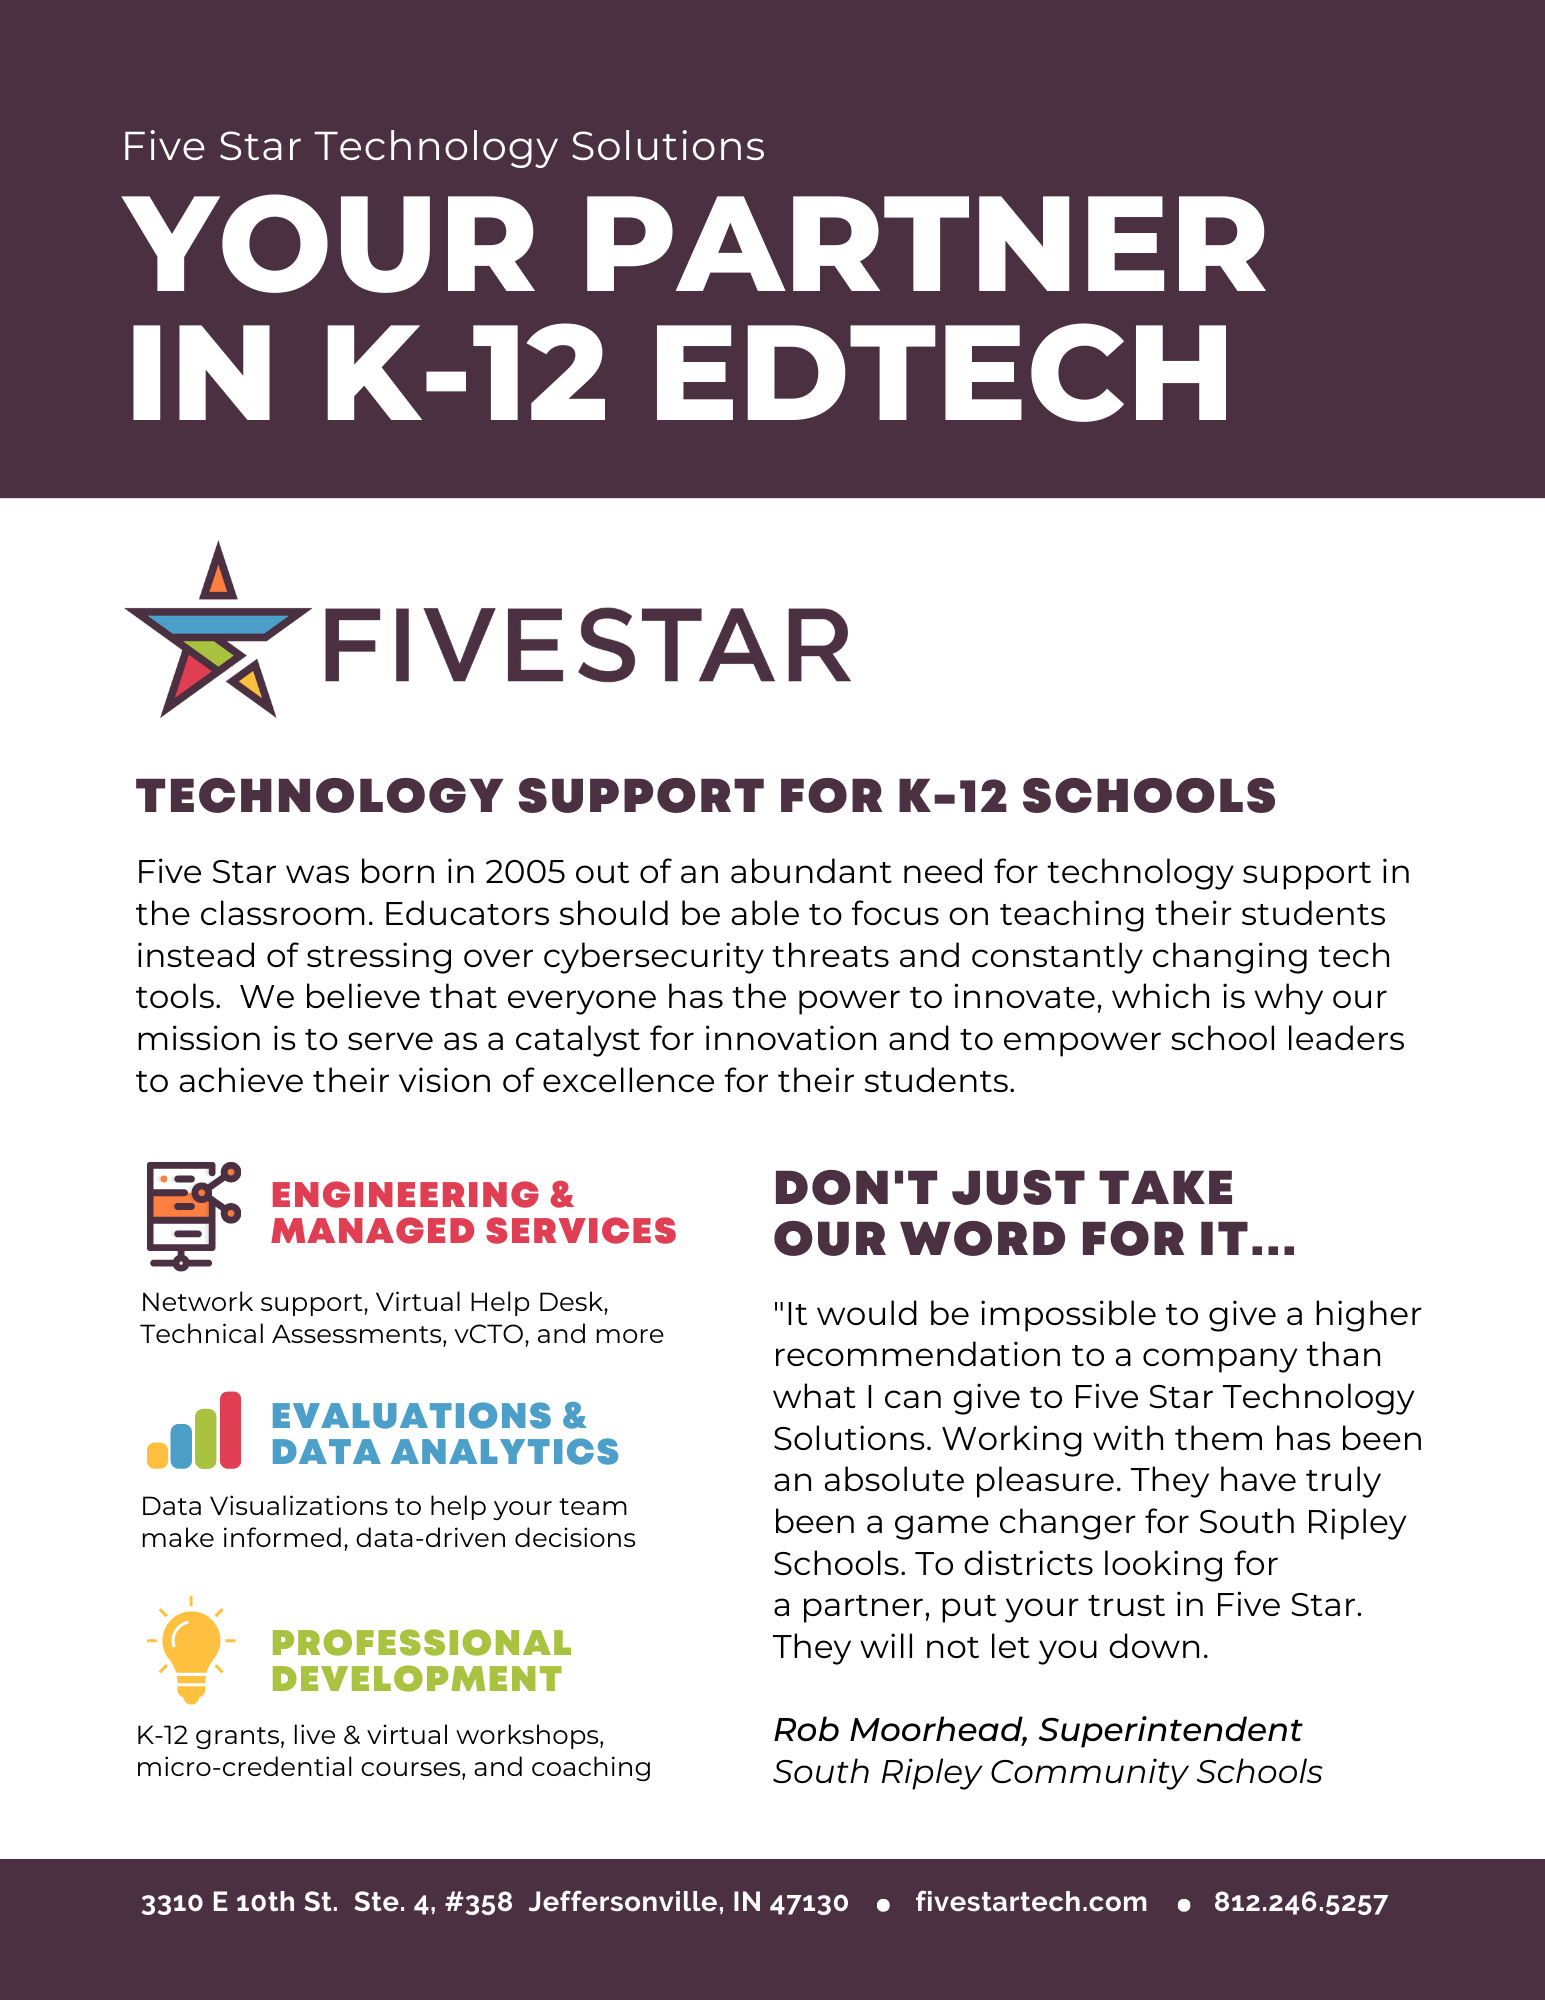 Five Star Technology Solutions - Your Partner in K-12 EdTech